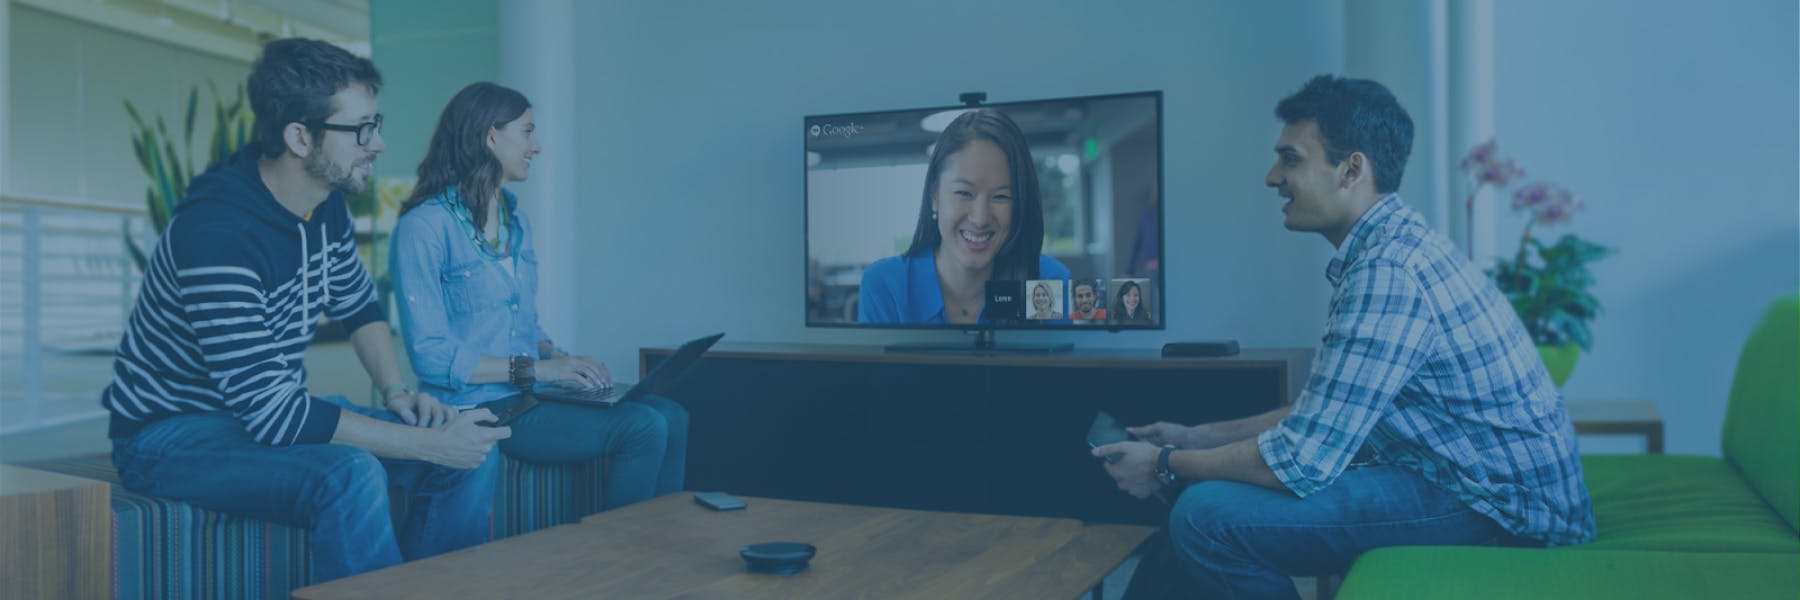 Video Conferencing with Google Meet